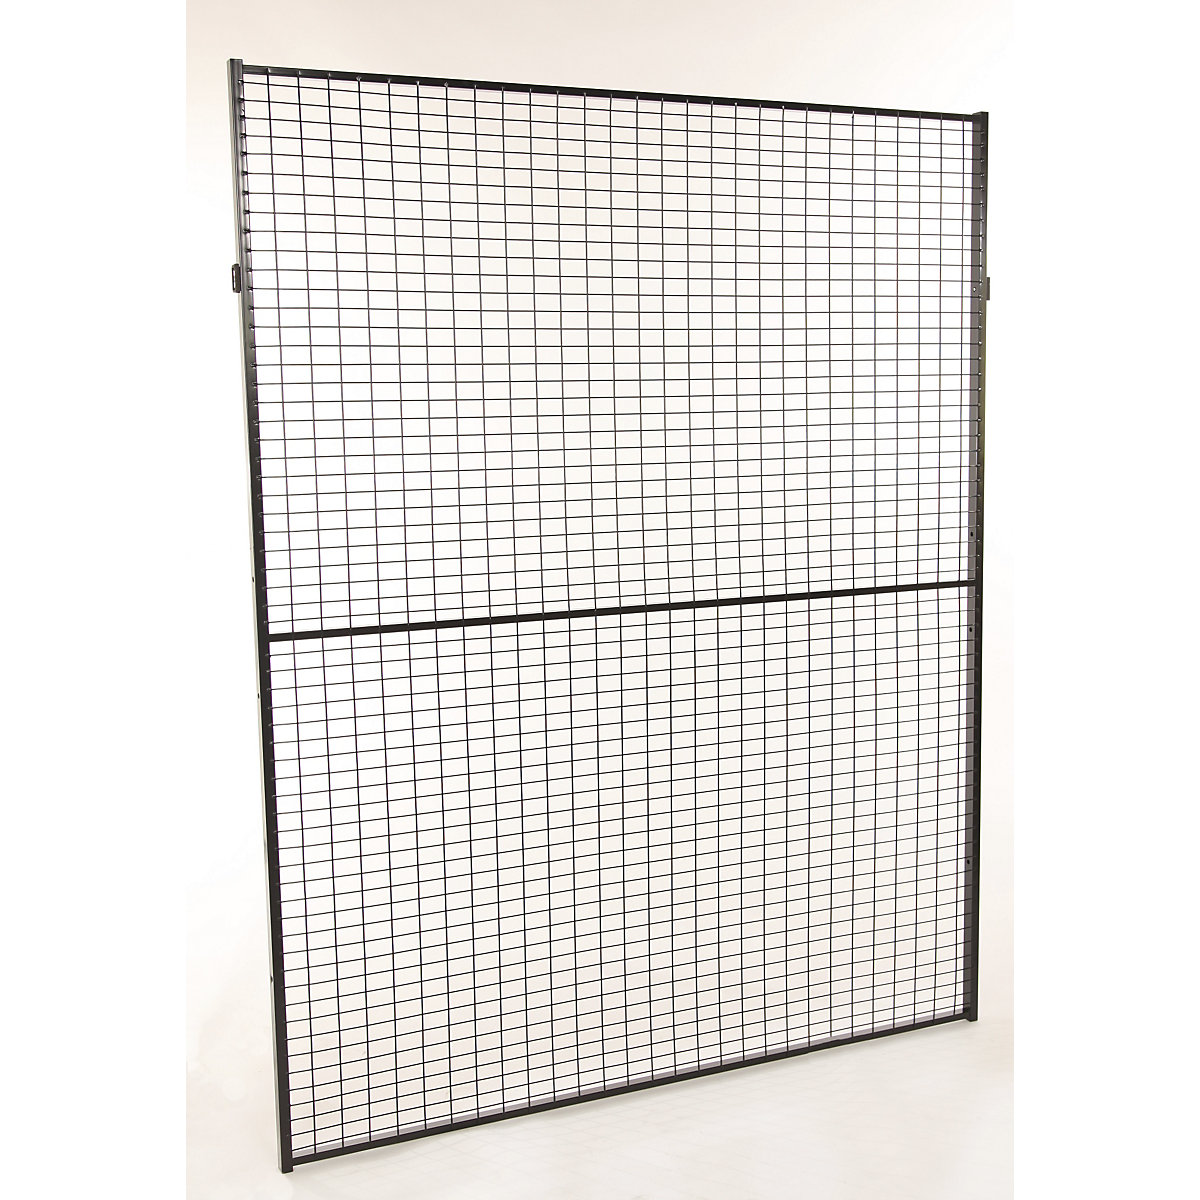 X-GUARD CLASSIC machine protective fencing, wall section – Axelent, height 2200 mm, width 1100 mm-17